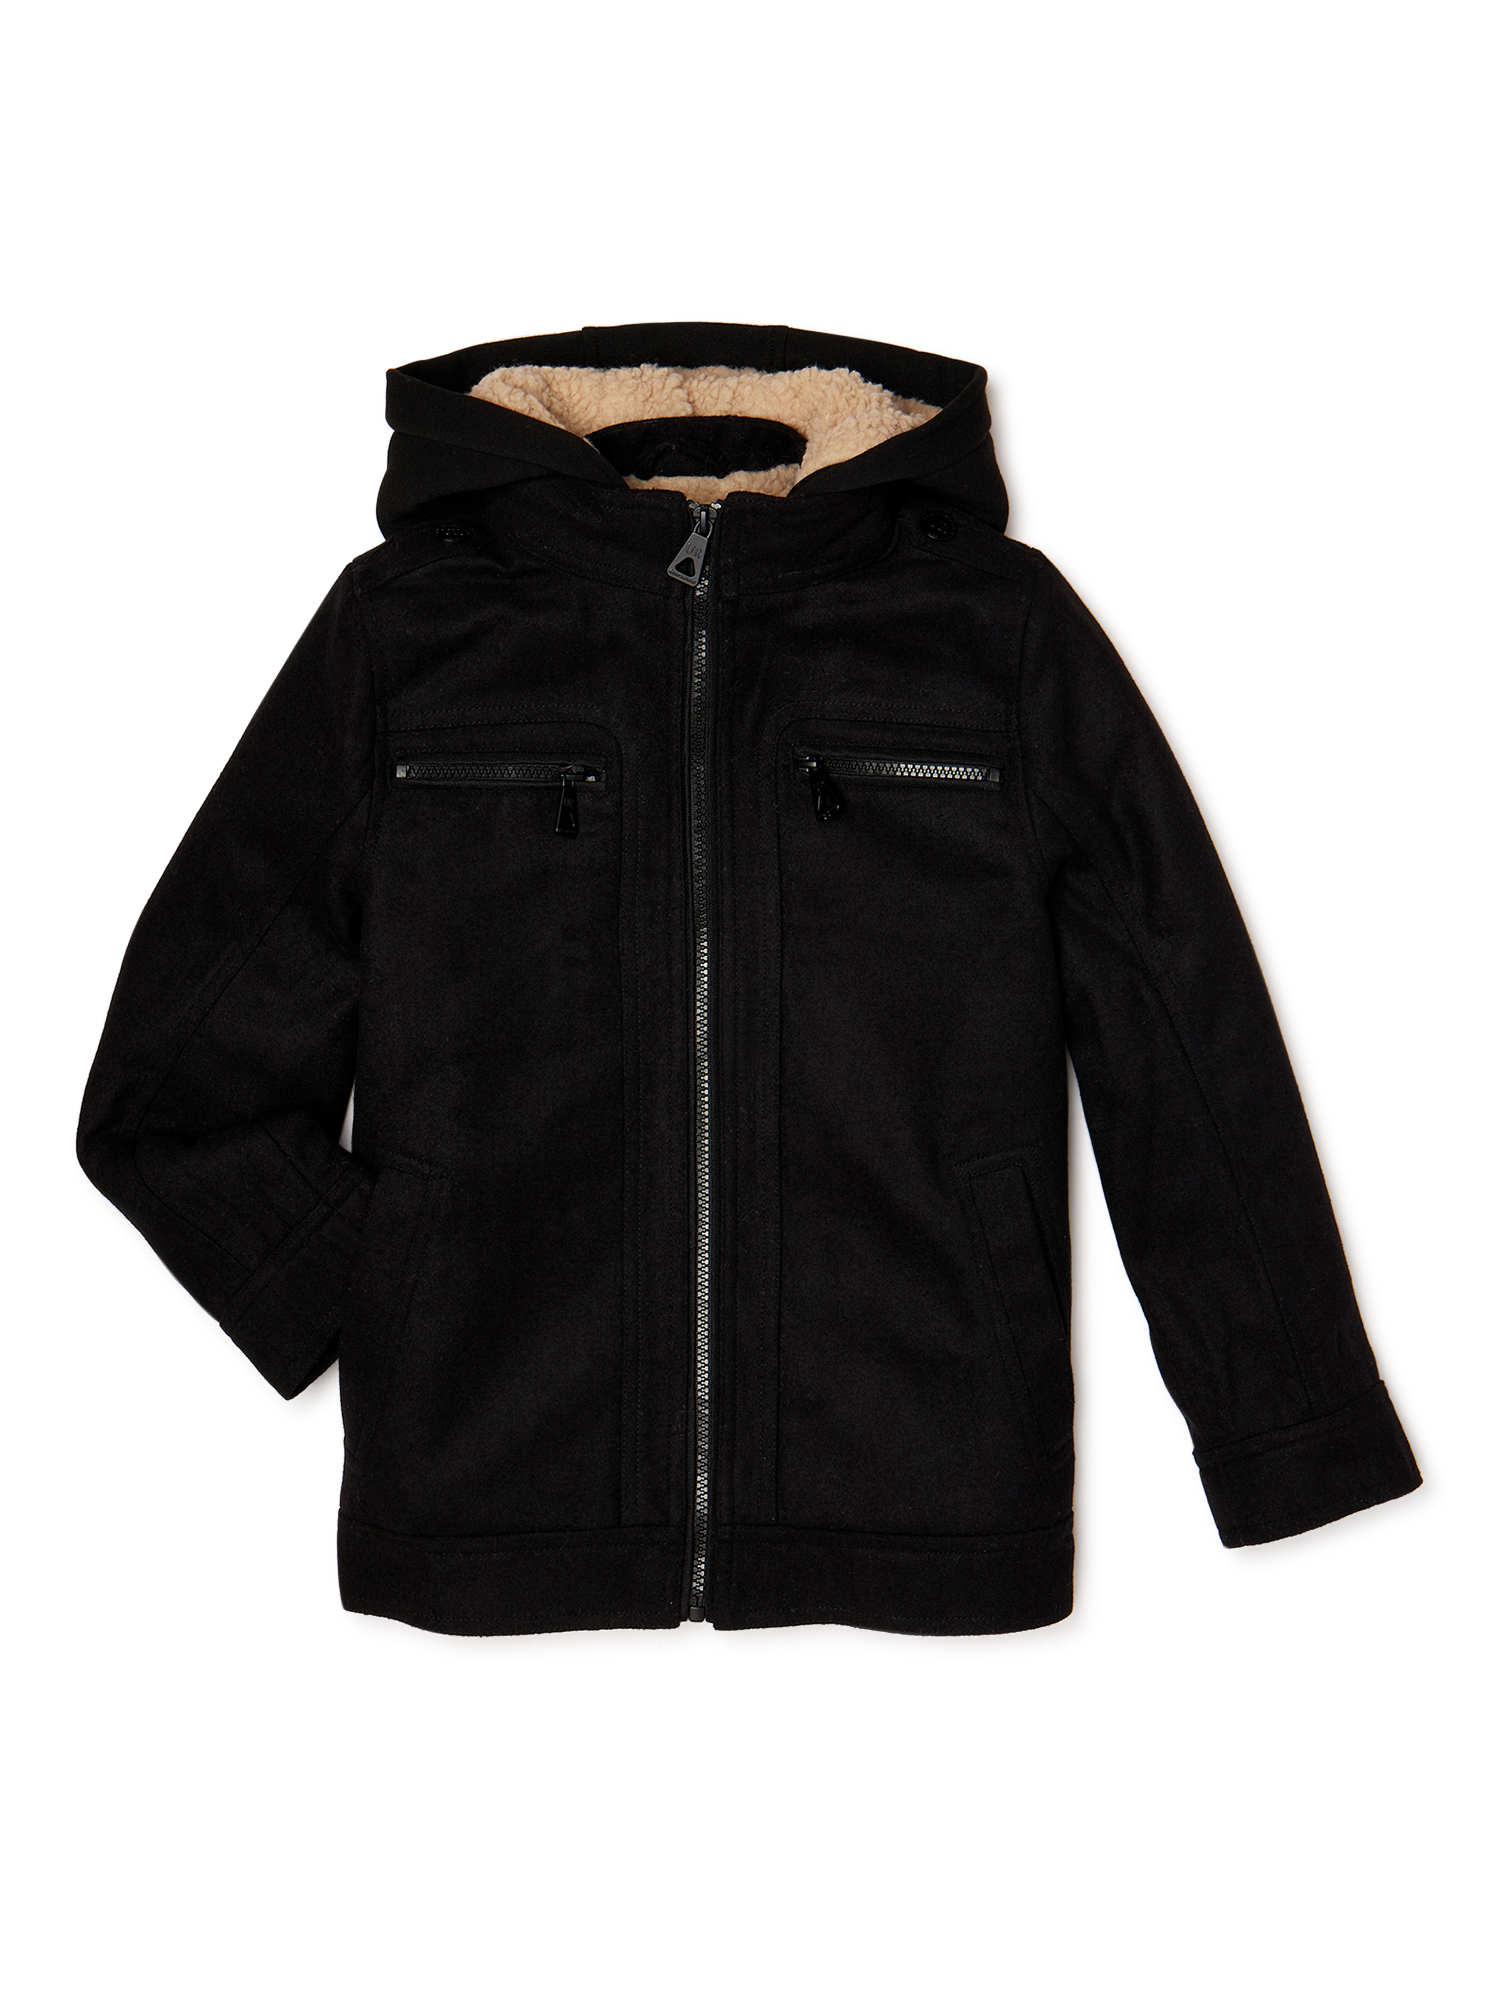 Urban Republic Boys Officer Jacket with Faux Sherpa Hood & Lining, Sizes 4-20 - image 1 of 3